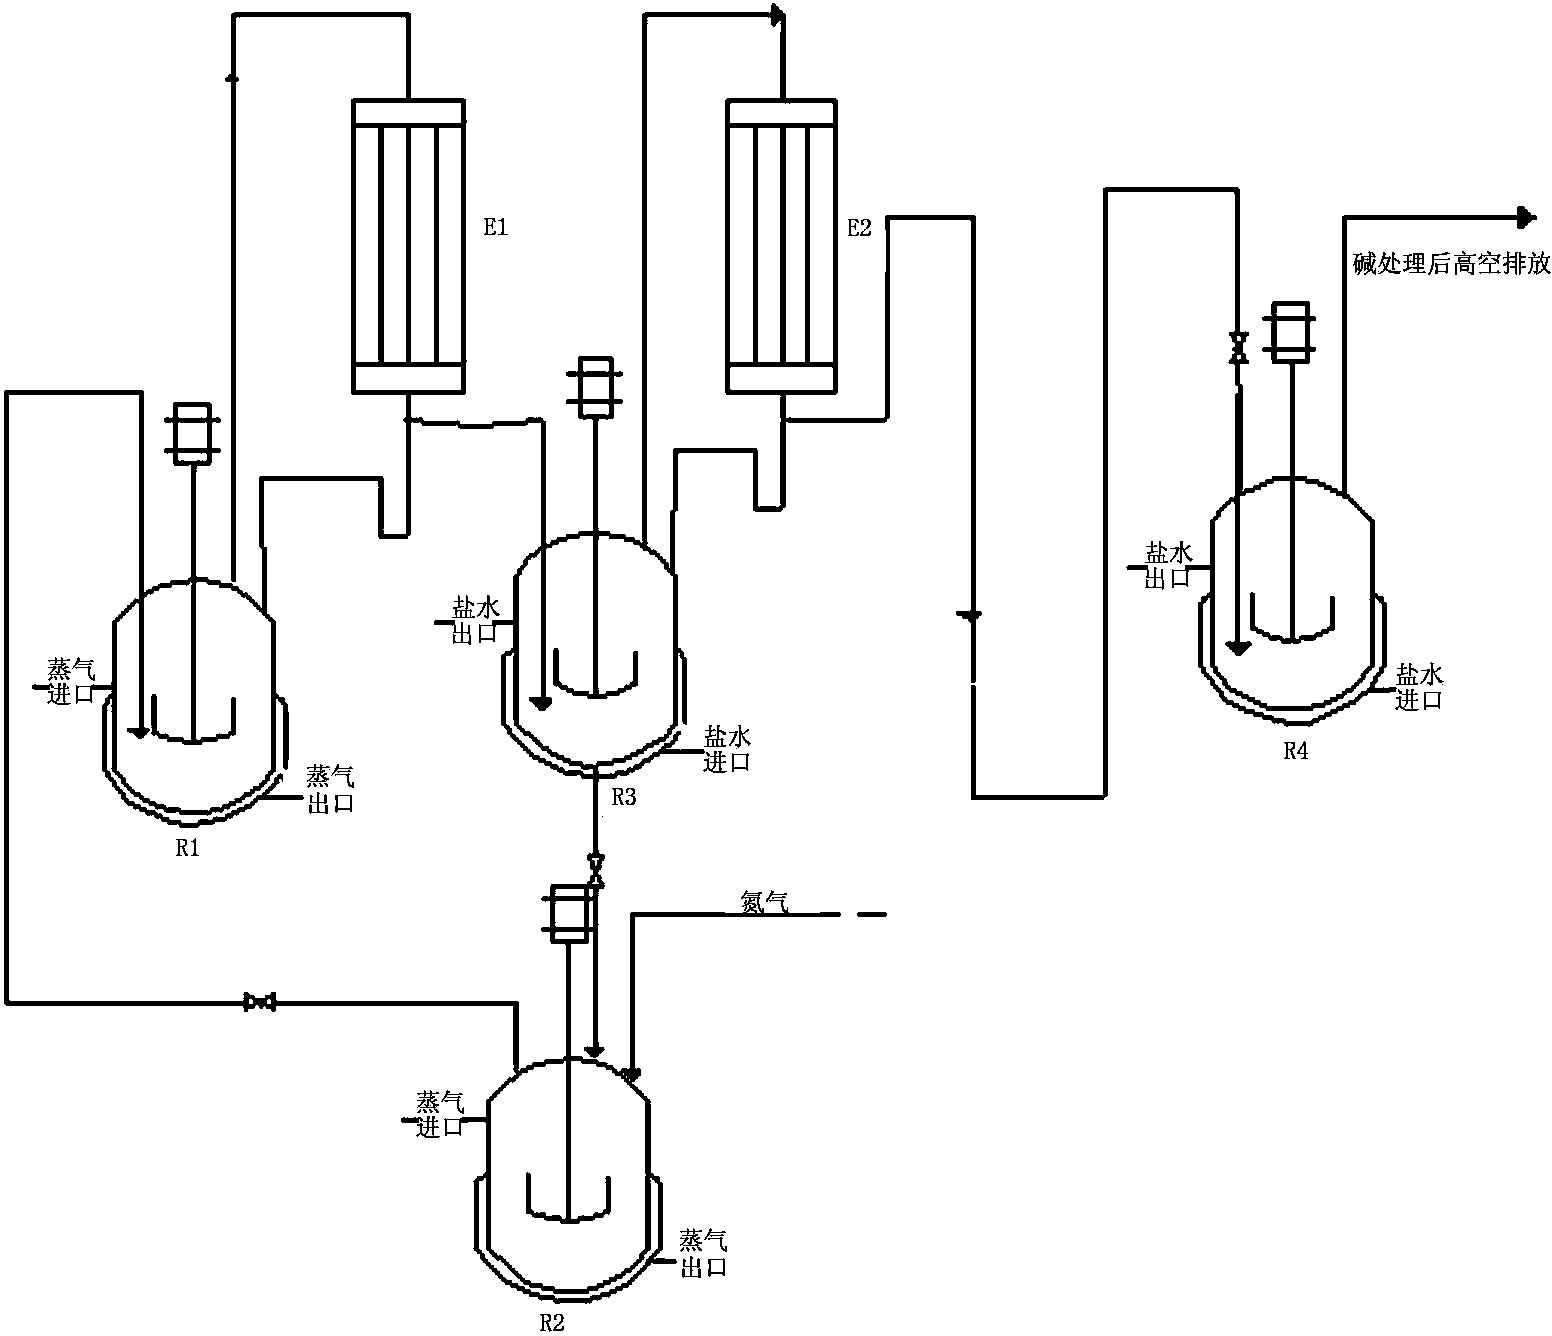 Method for applying esterification tail gas produced in synthesis of butyl isocyanate to salification